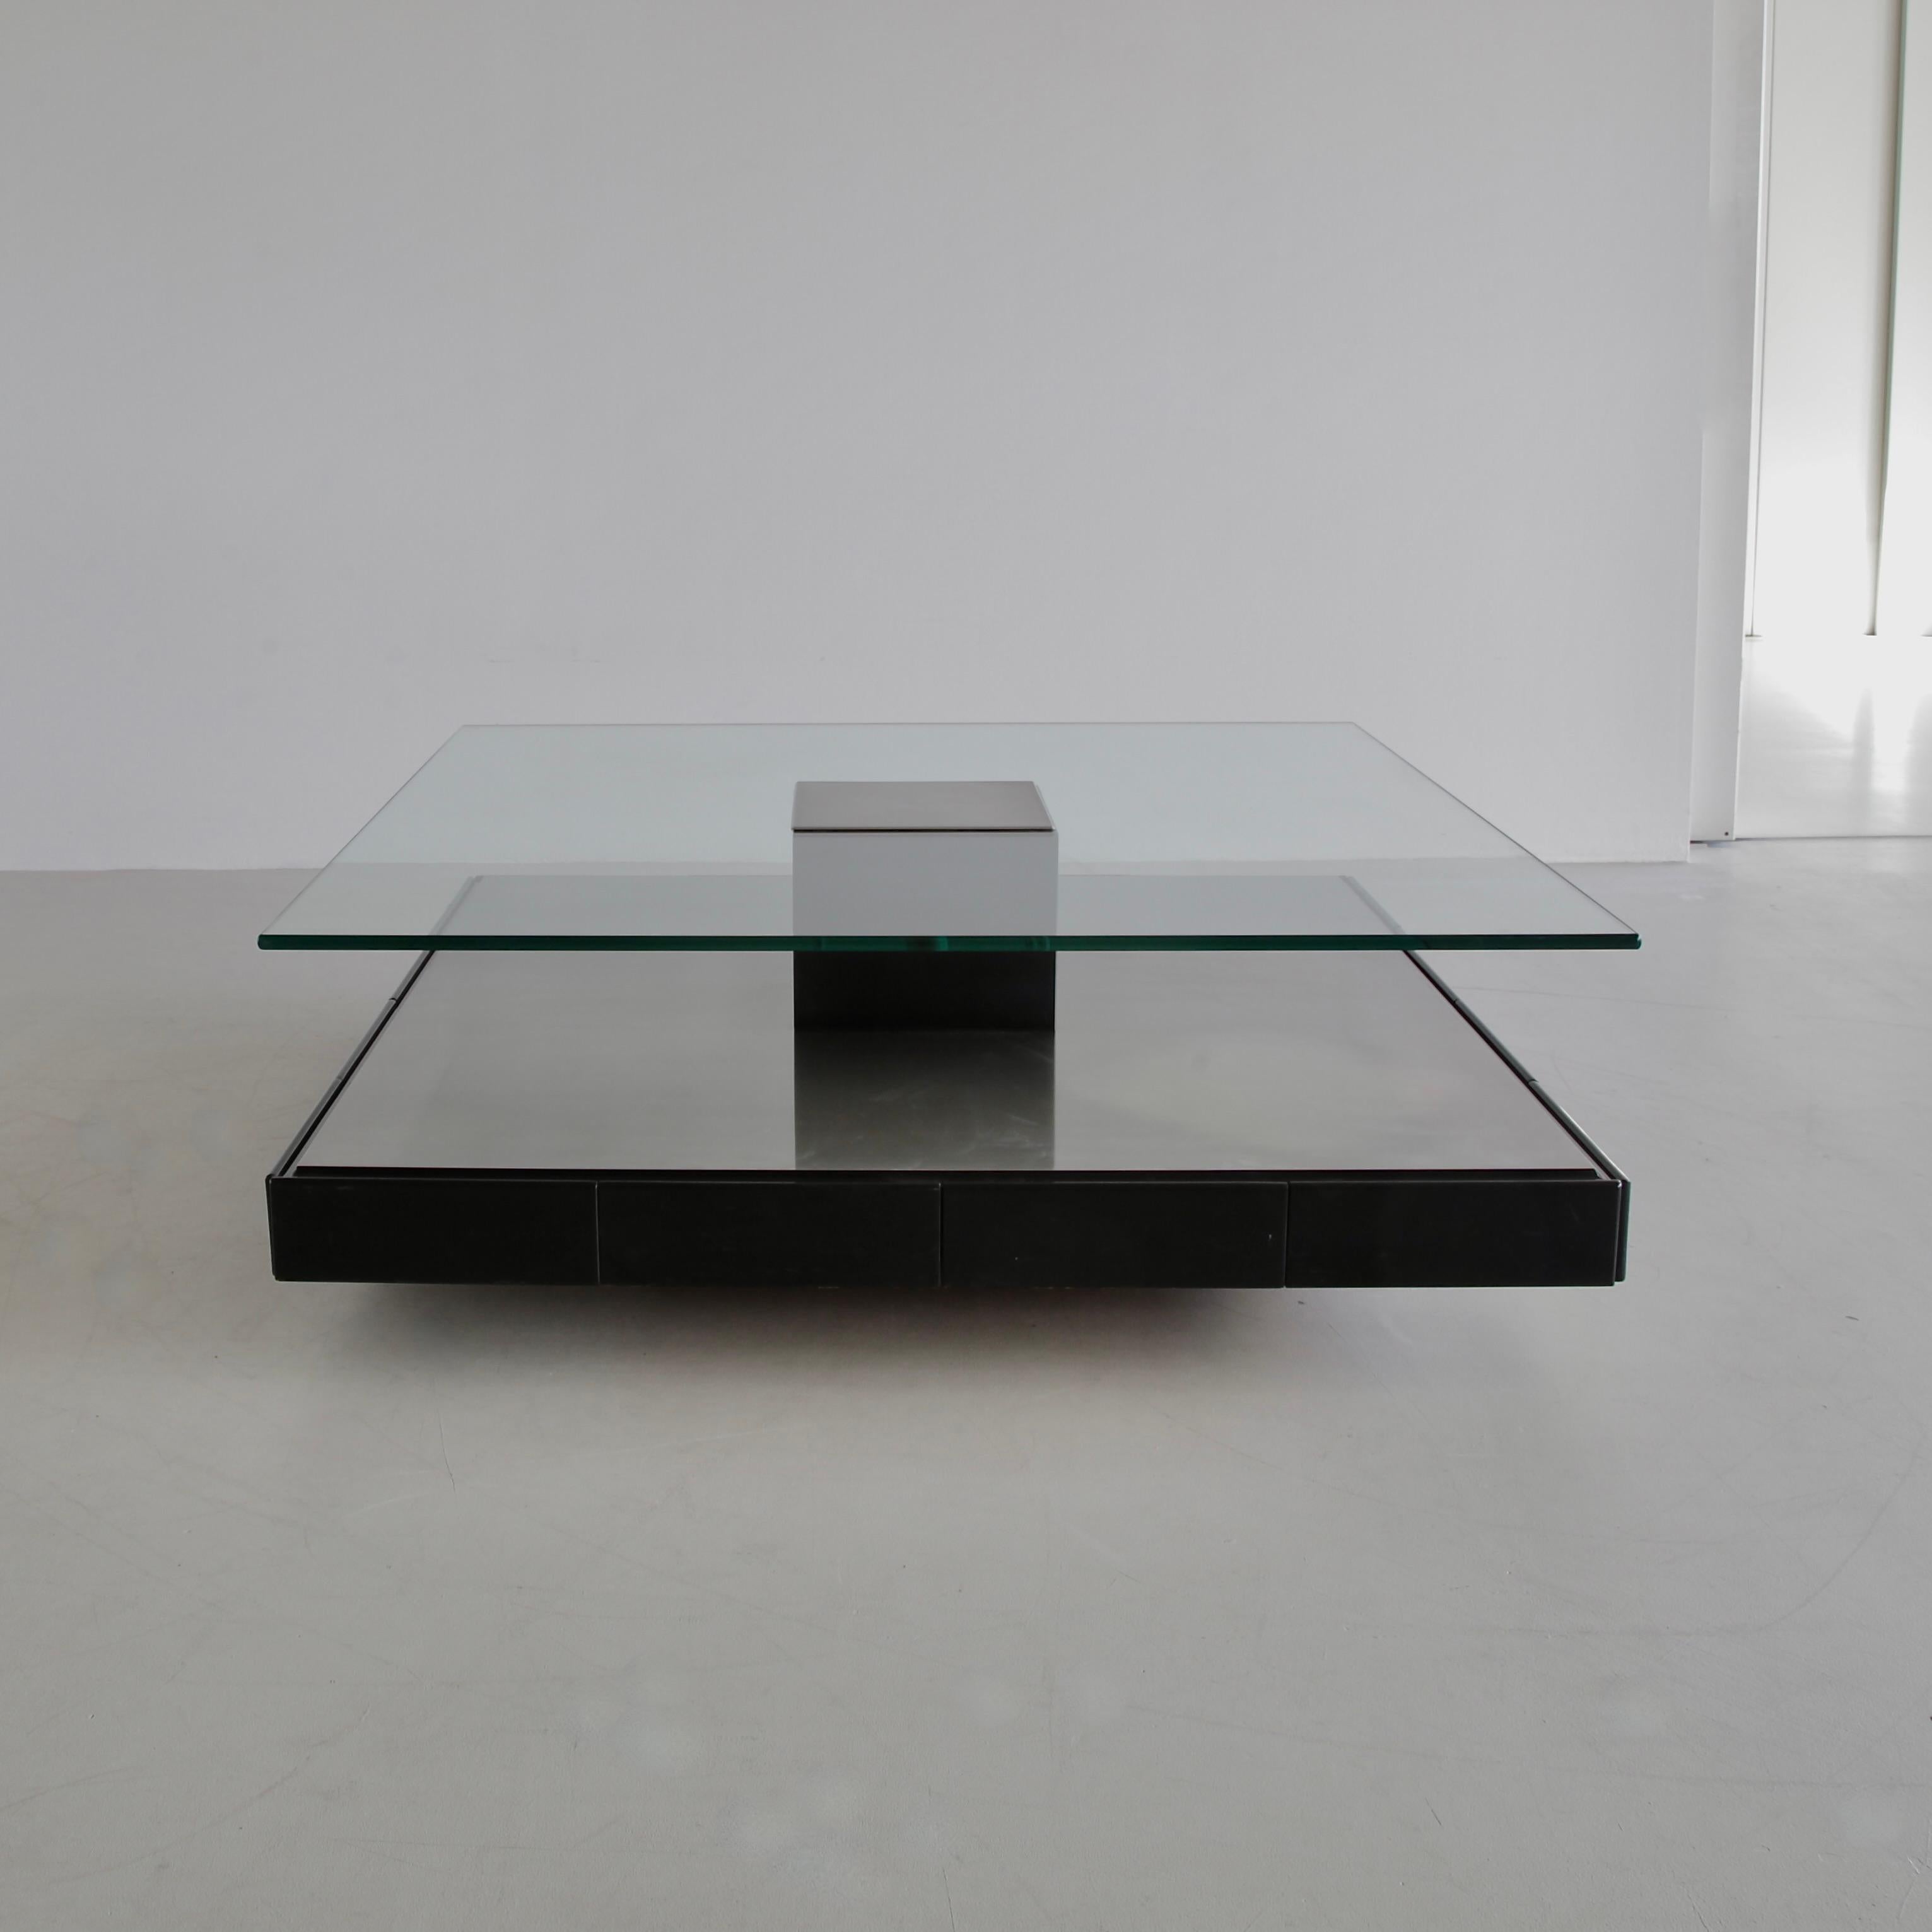 Minimalist coffee table (Tecno T147) with brushed metal base on wood containing eight drawers, thick glass shelf with brushed metal insert. Tecno labels on glass and all drawers. Eight rollers underneath the base for easy manoeuvring. Fantastic